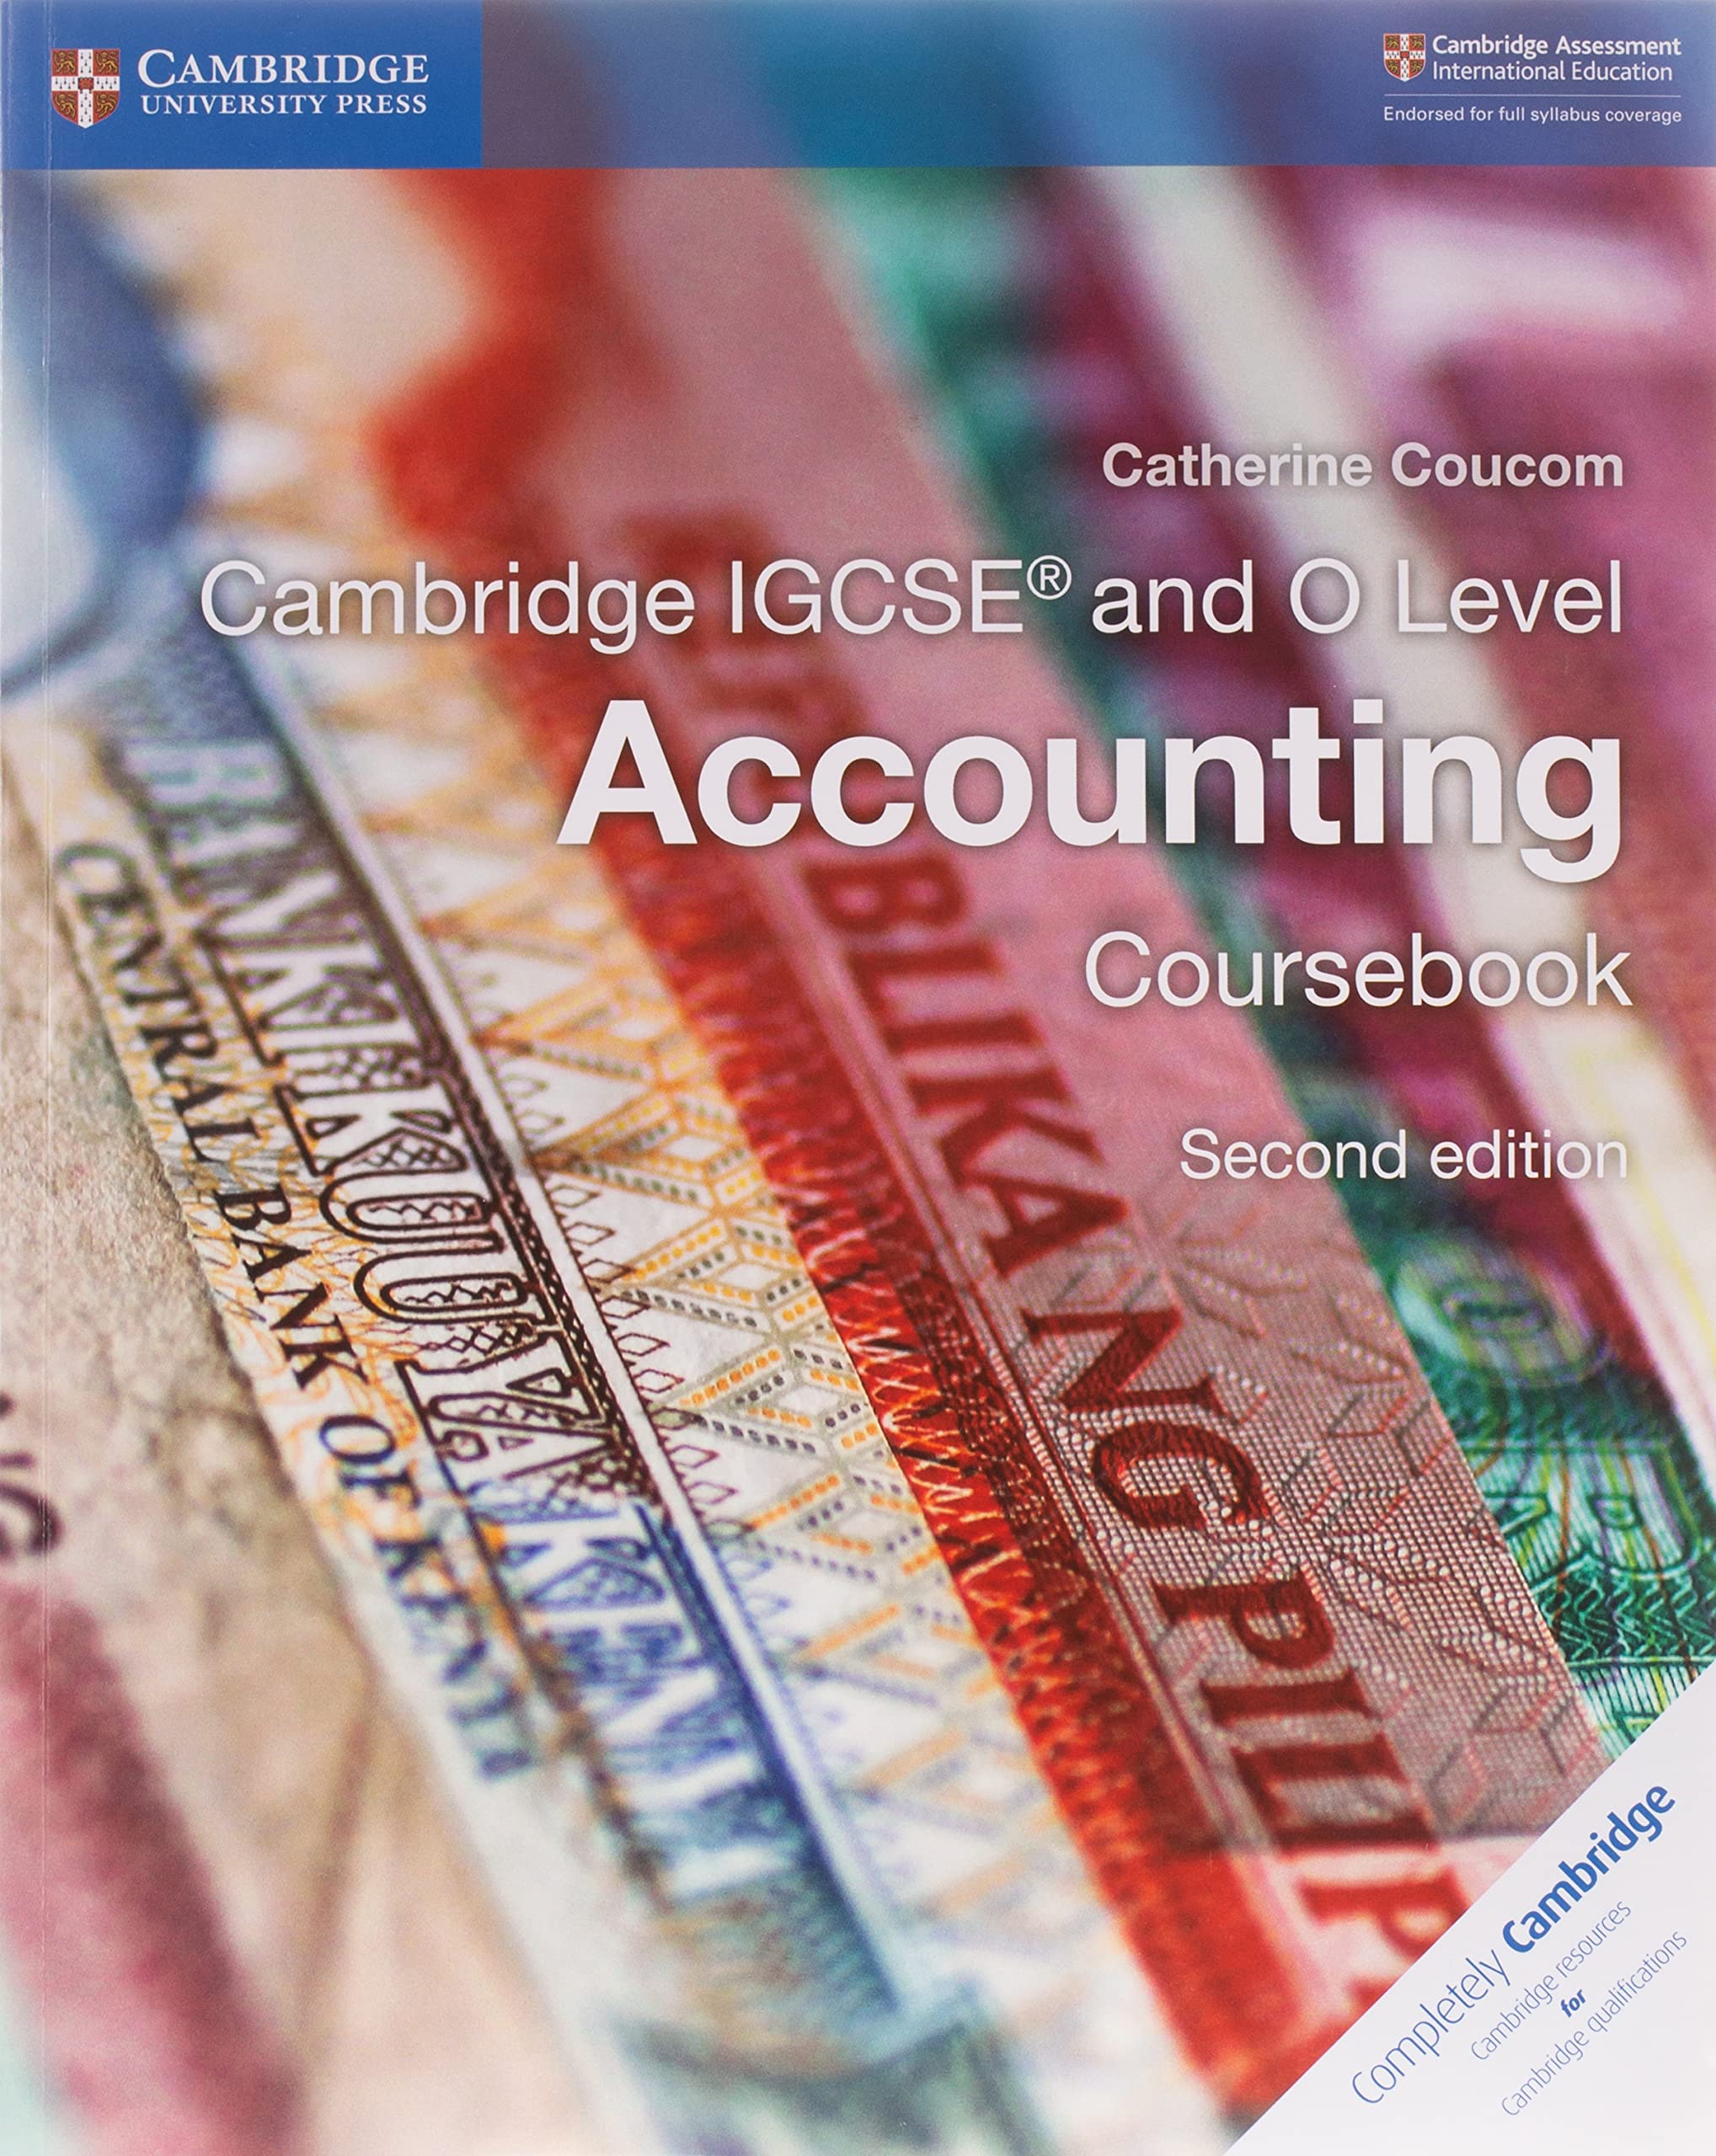 Cambridge IGCSE and O Level Accounting Coursebook 2nd Edition by Catherine Coucom